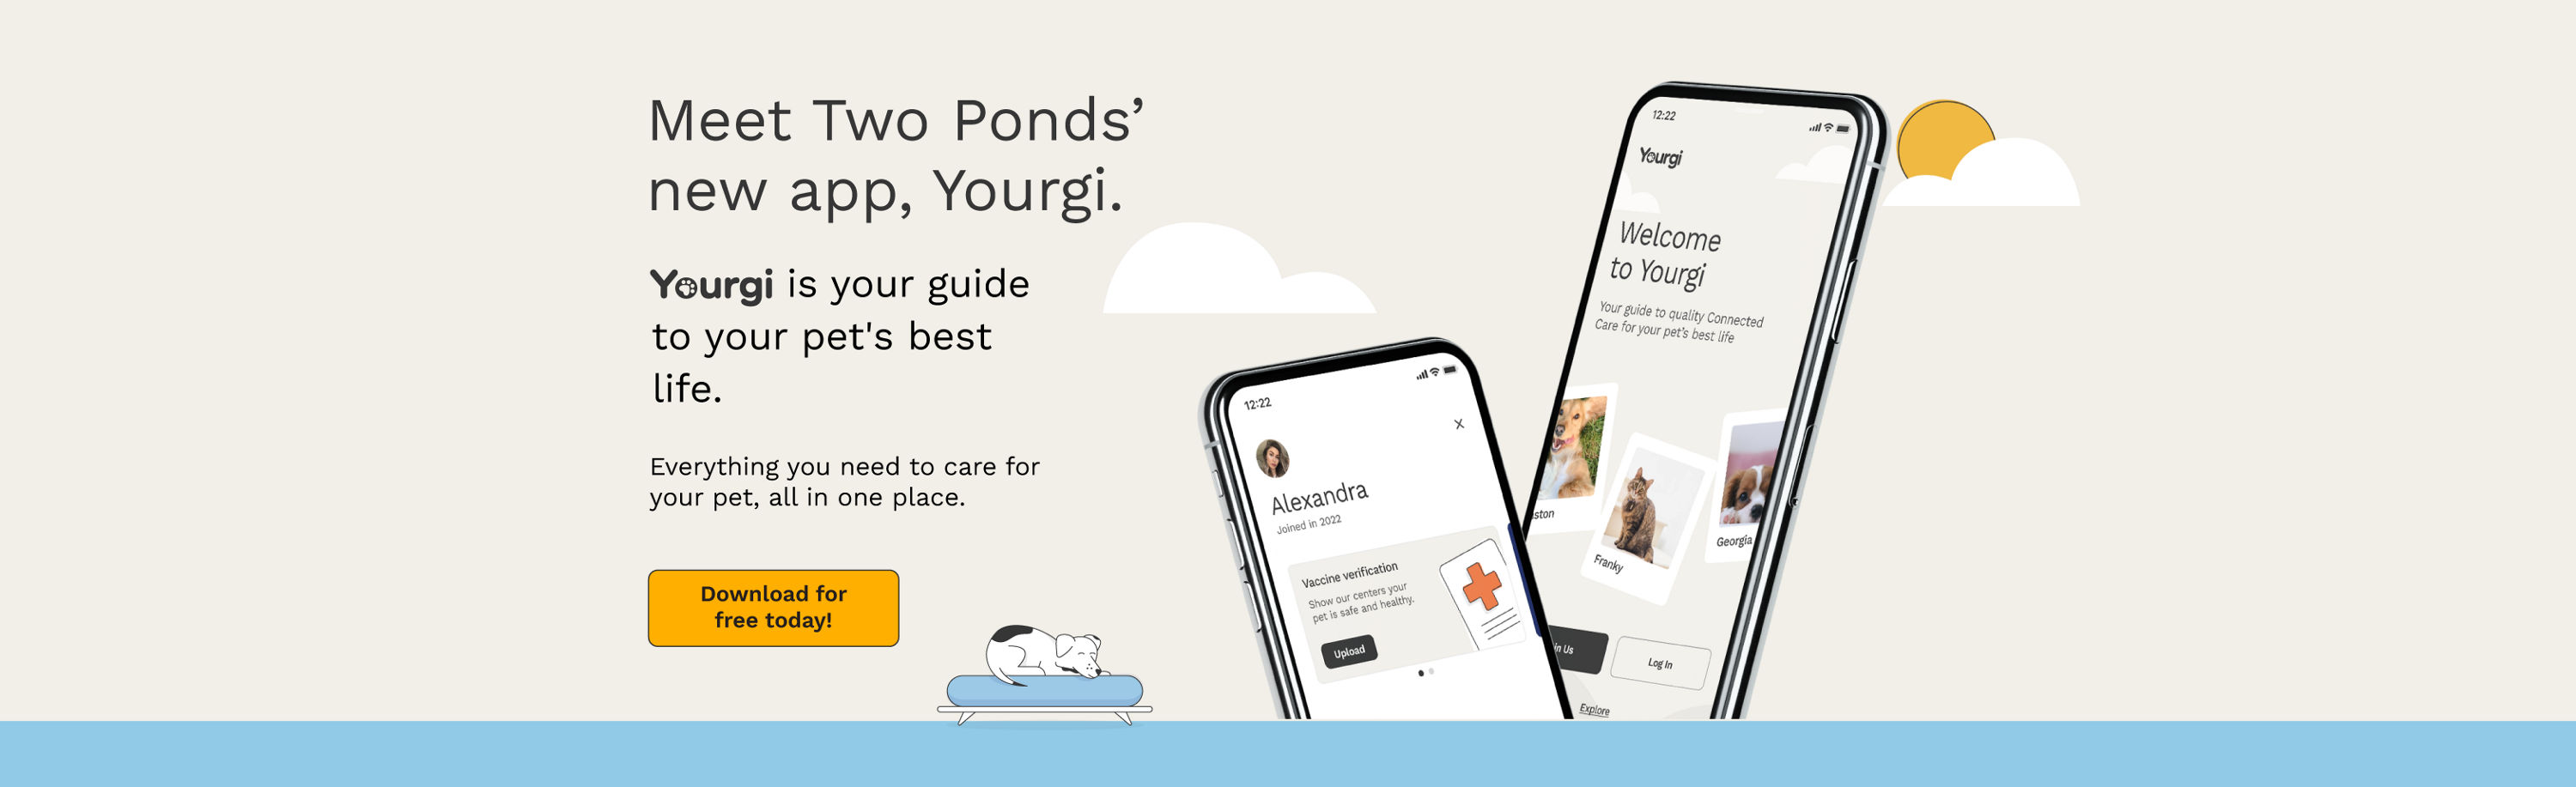 Meet Two Ponds' new app, Yourgi.